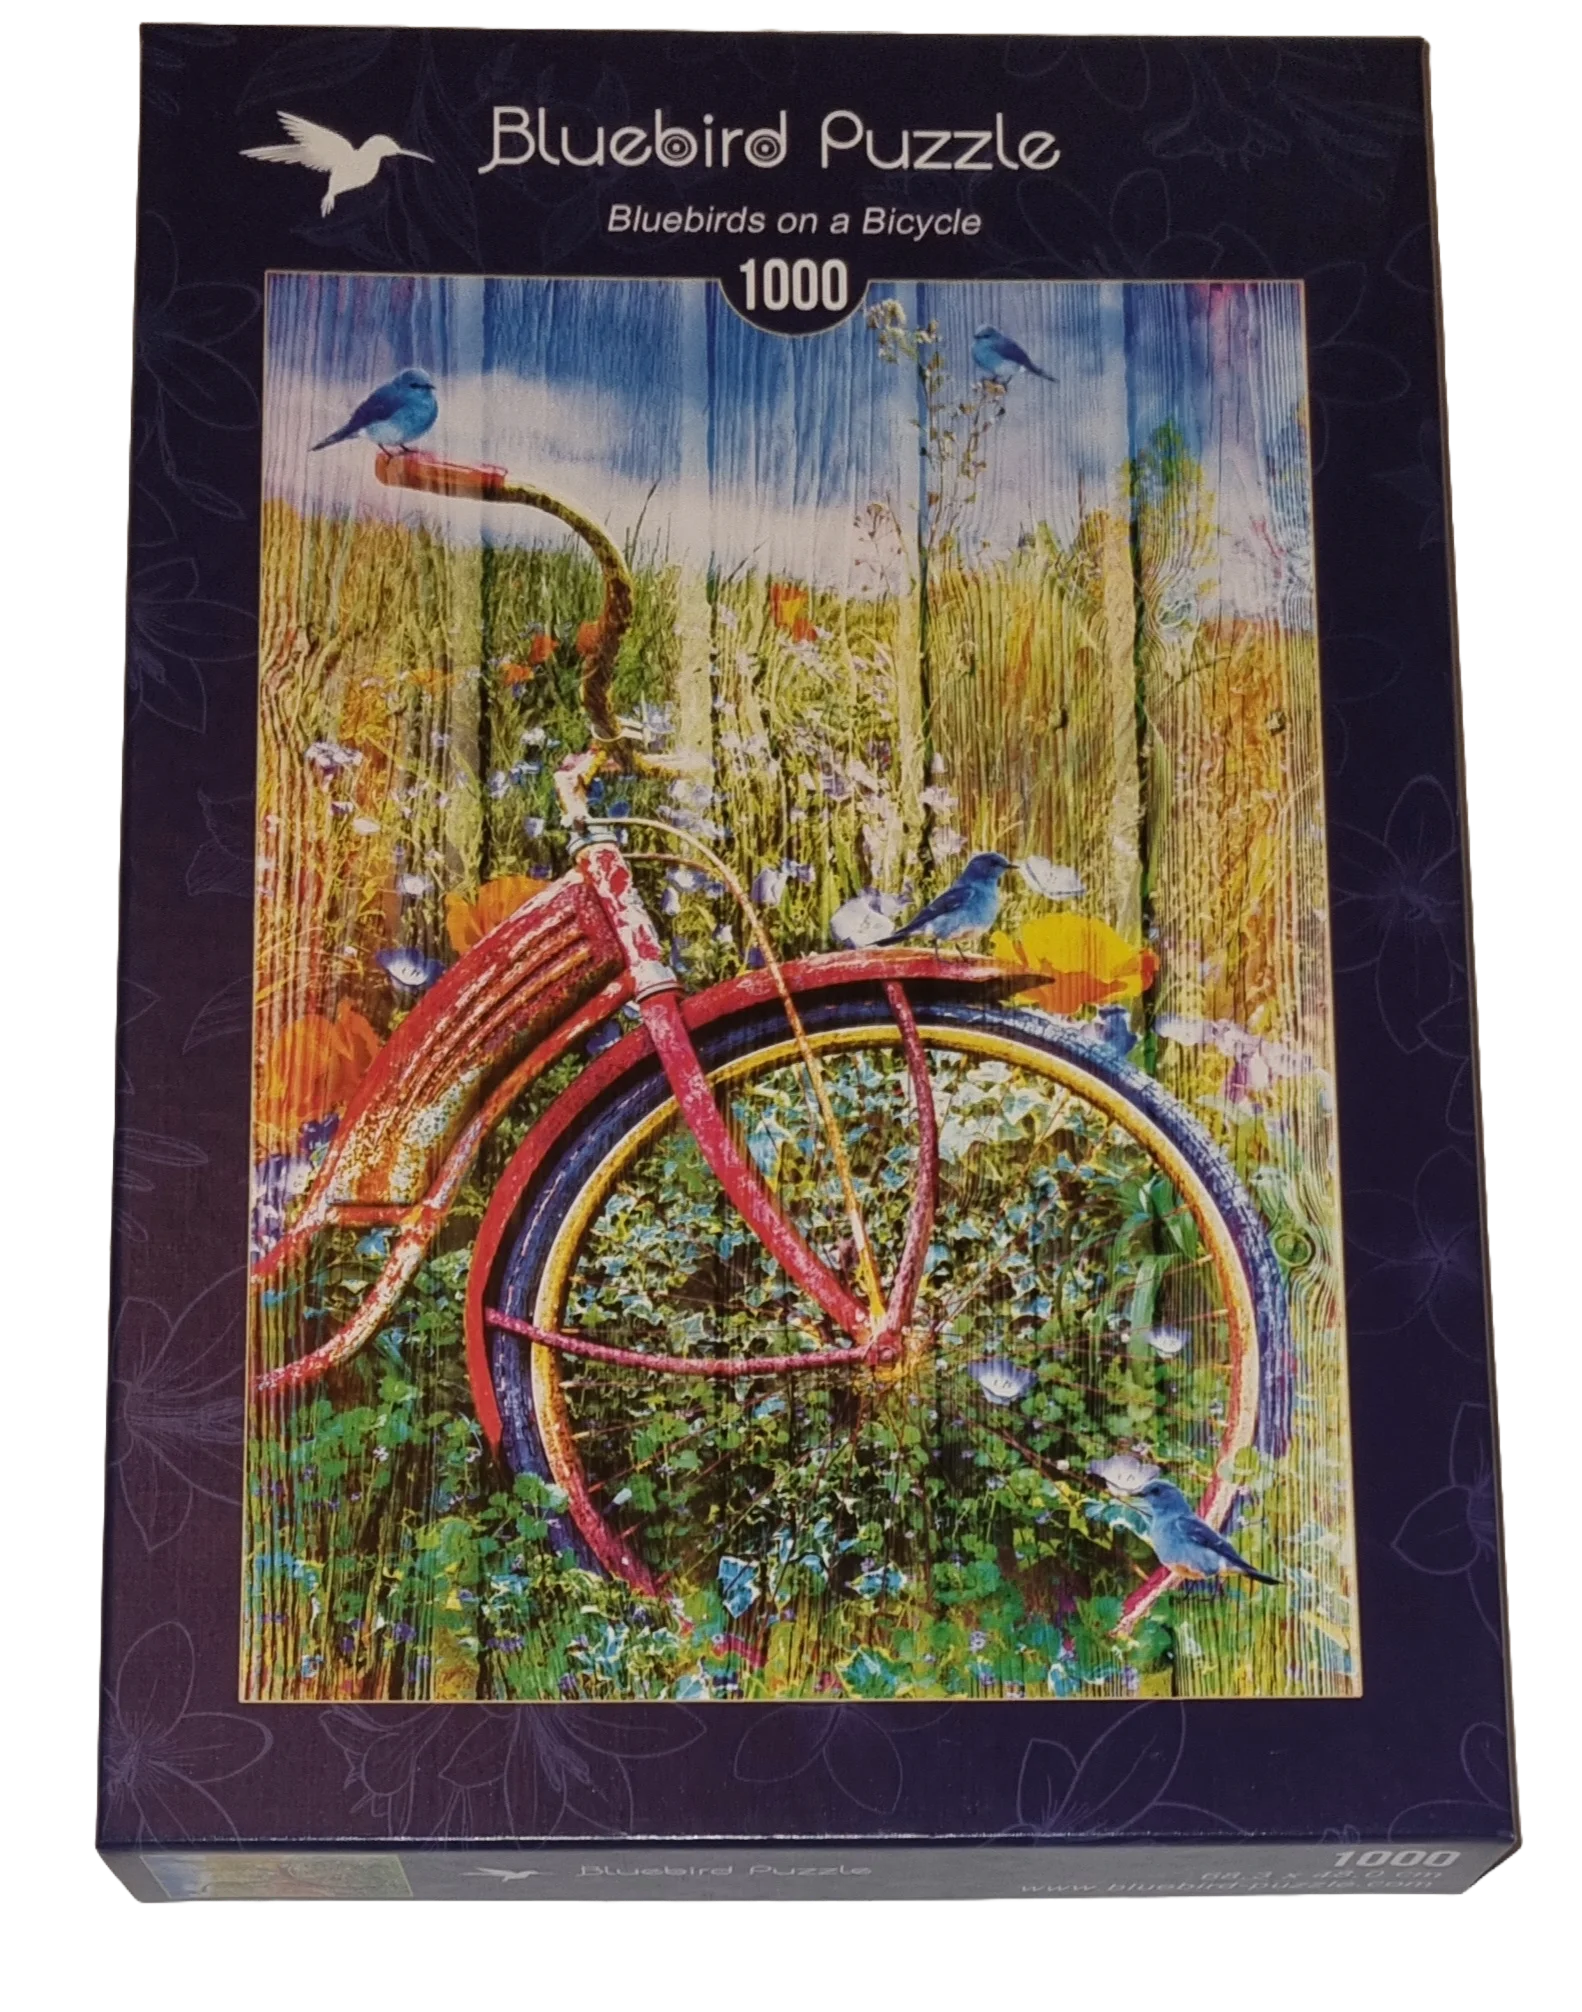 Art by Bluebird Puzzle 1000 Teile 70300 Bluebirds on a bicycle